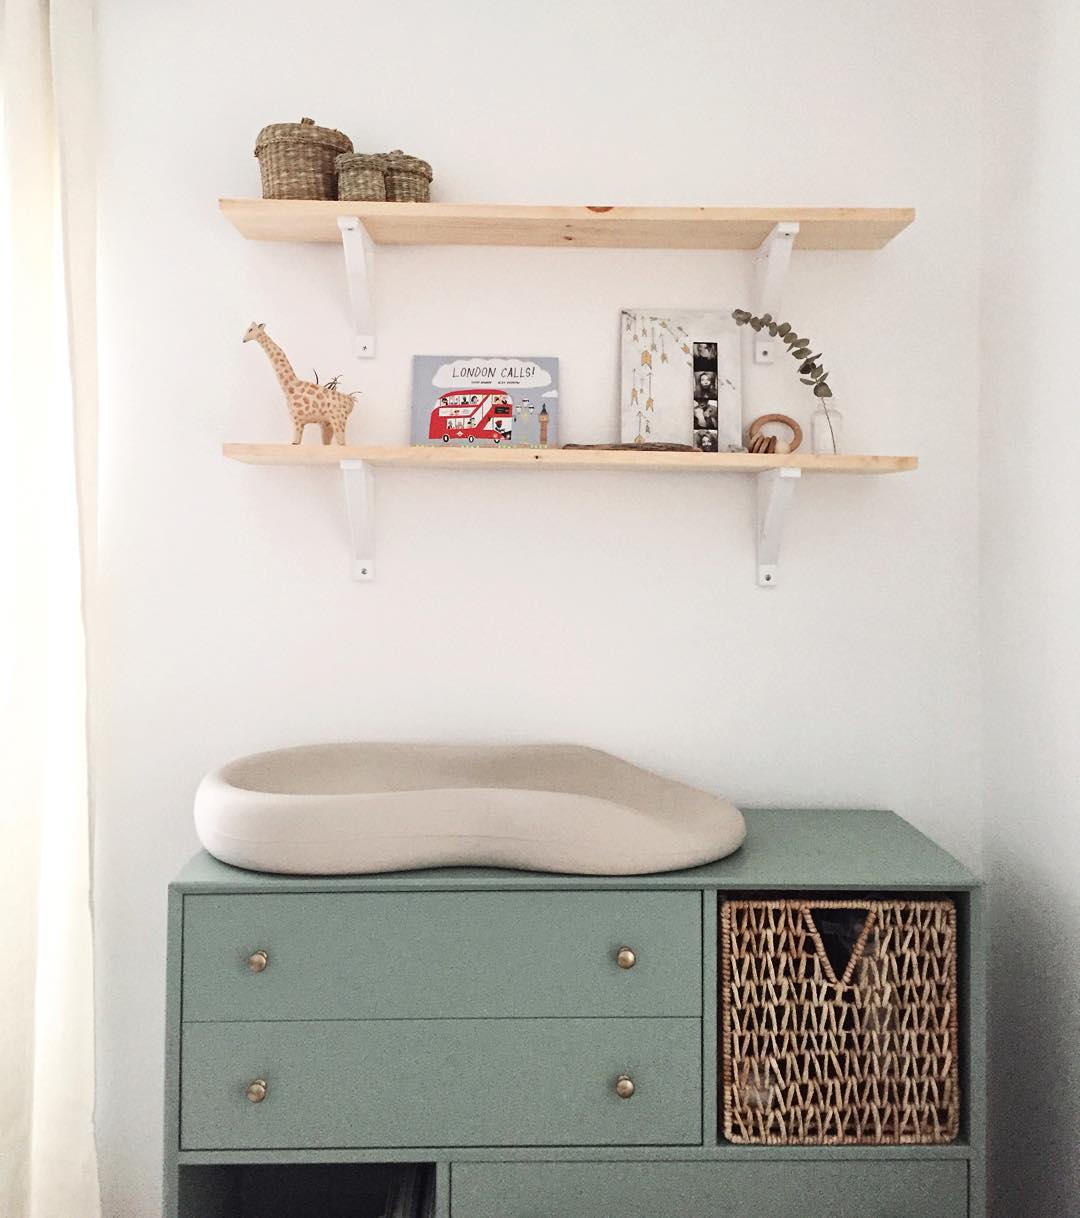 Changing station on dresser. Photo by Instagram user Changing Station on Dresser